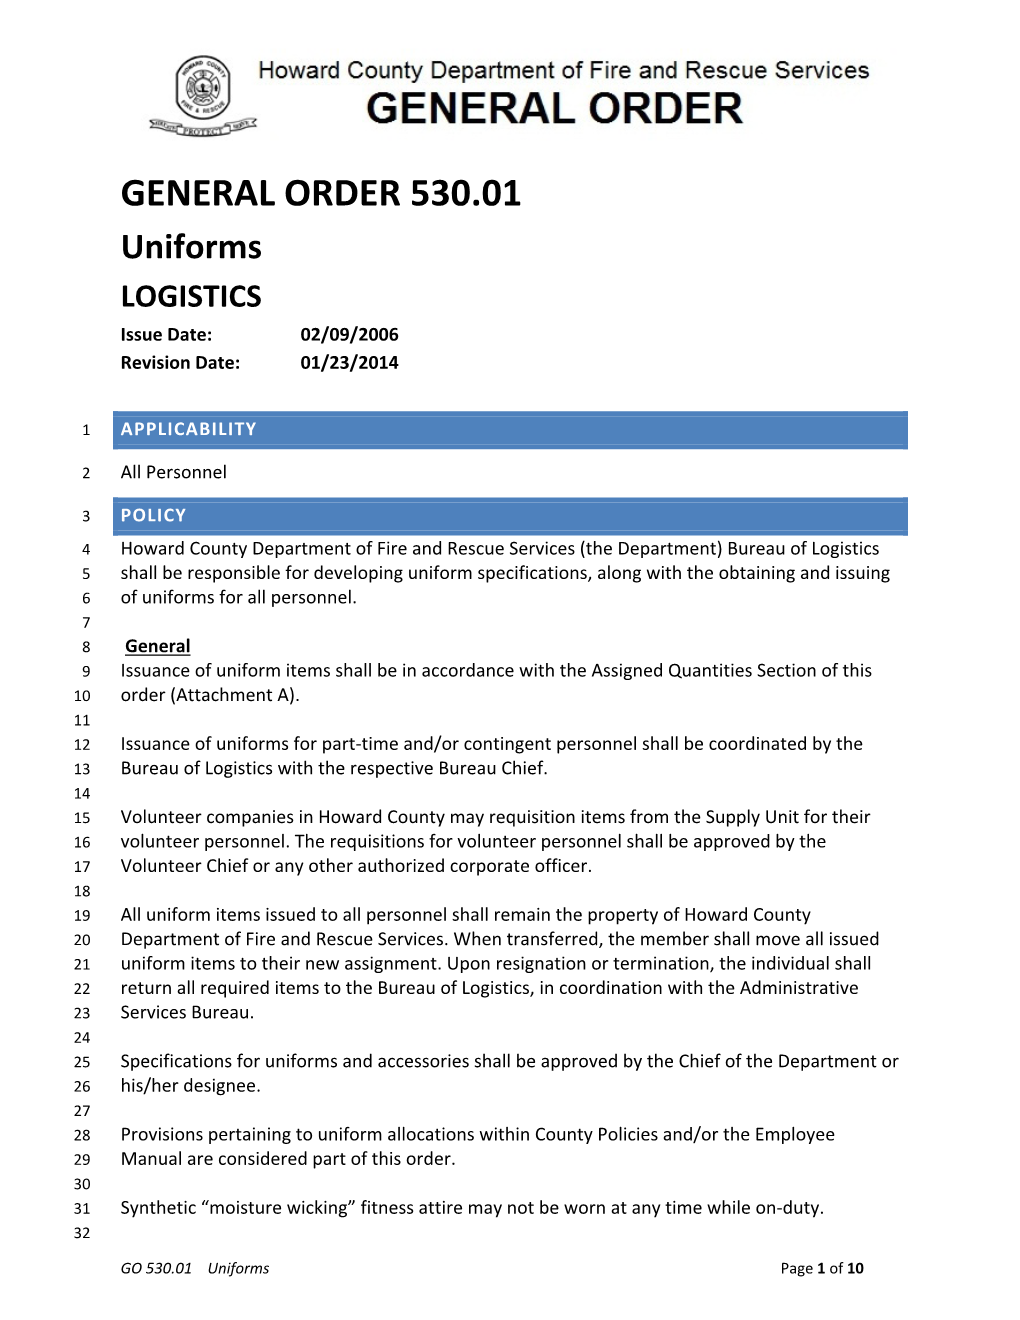 GENERAL ORDER 530.01 Uniforms LOGISTICS Issue Date: 02/09/2006 Revision Date: 01/23/2014